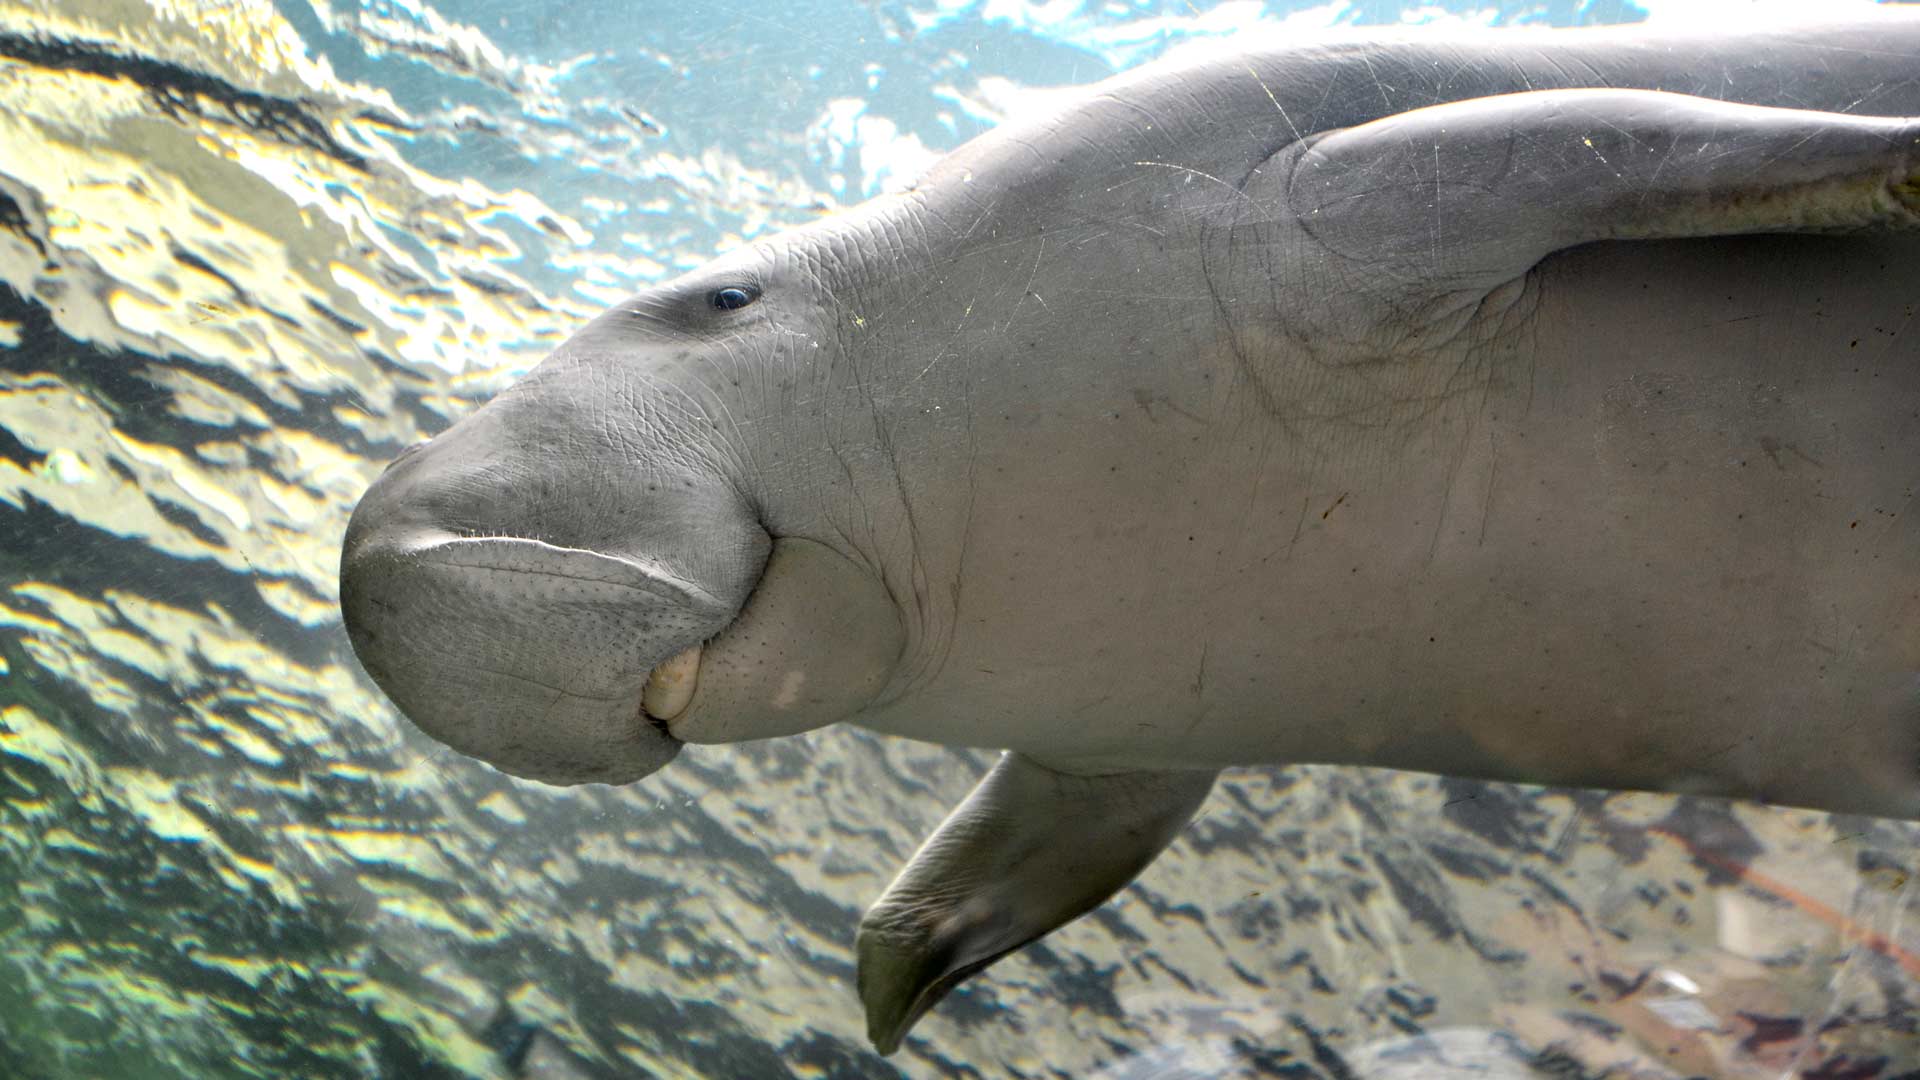 Live Stream: Playtime with Pig the Dugong